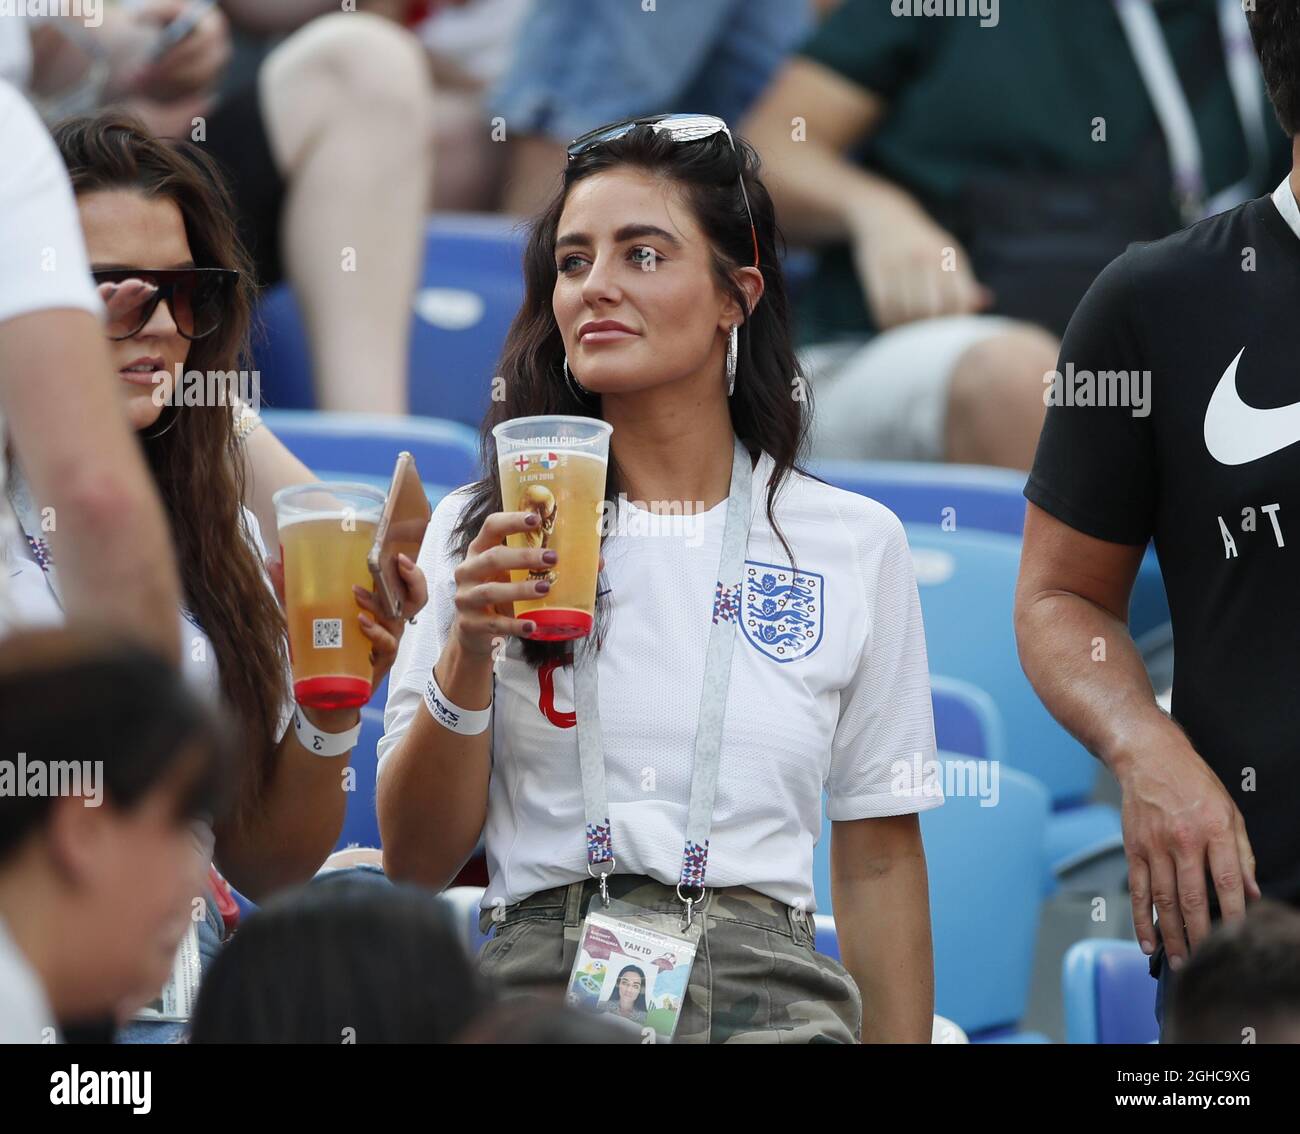 Annie Kilner girlfriend of Kyle Walker of England has a pint while watching  during the FIFA World Cup 2018 Group G match at the Nizhny Novgorod  Stadium, Nizhny Novgorod. Picture date 24th